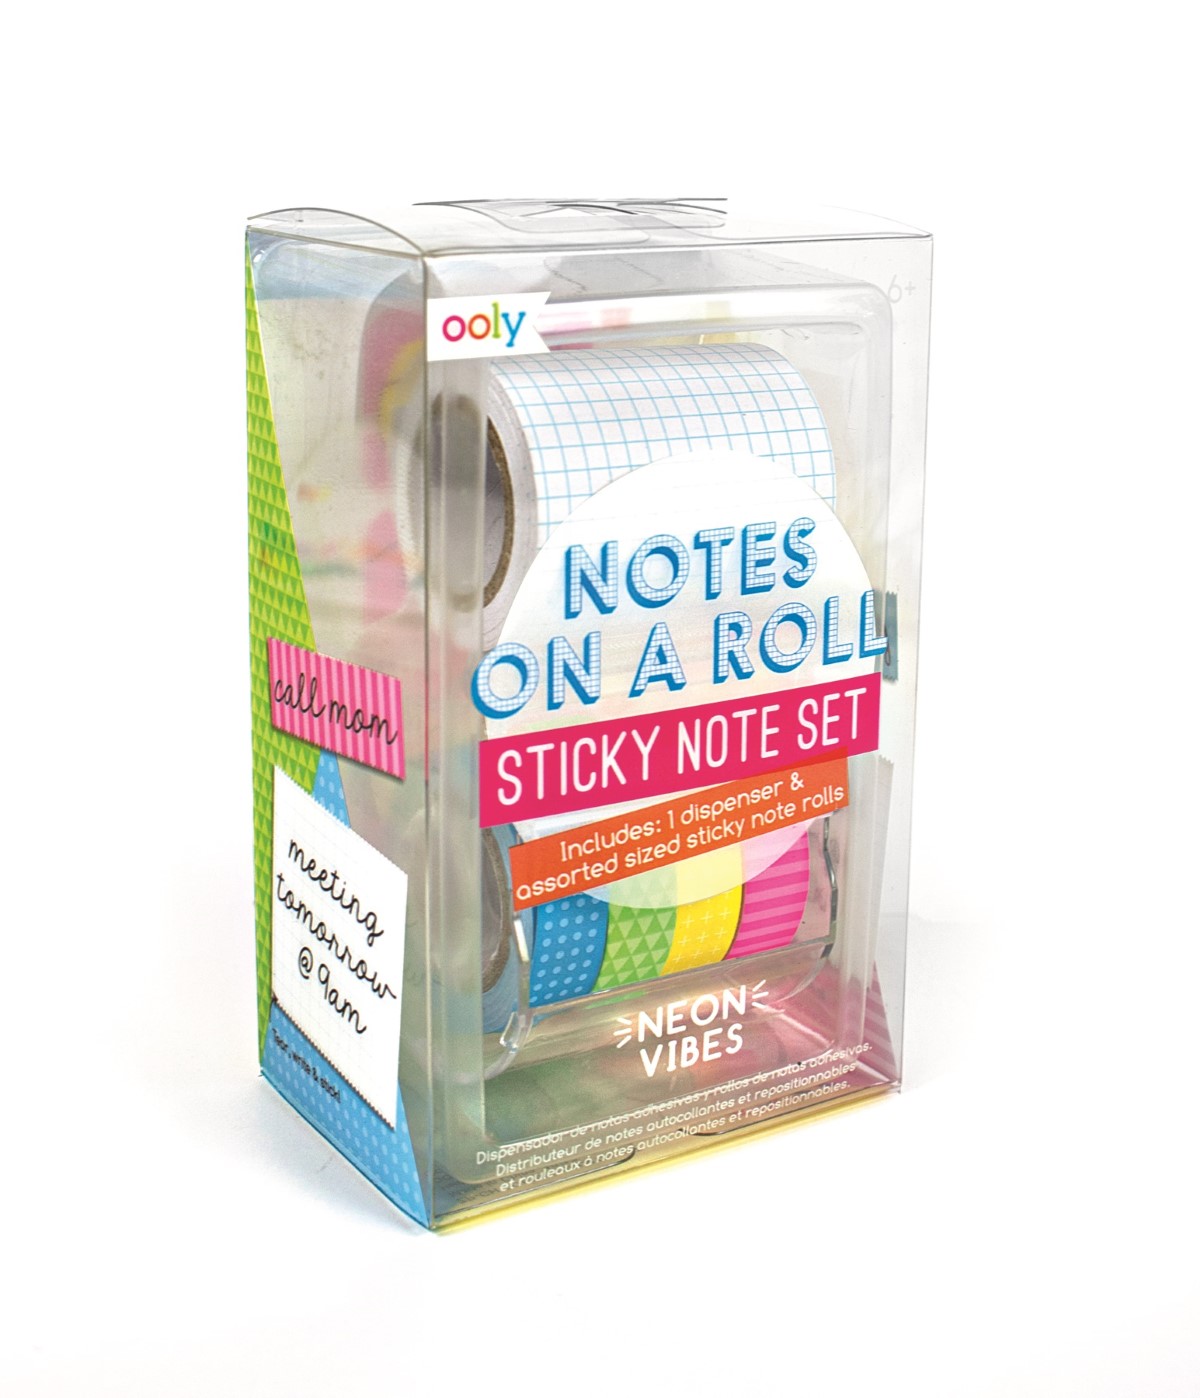 Ooly Notes On A Roll Neon Vibes Sticky Notes